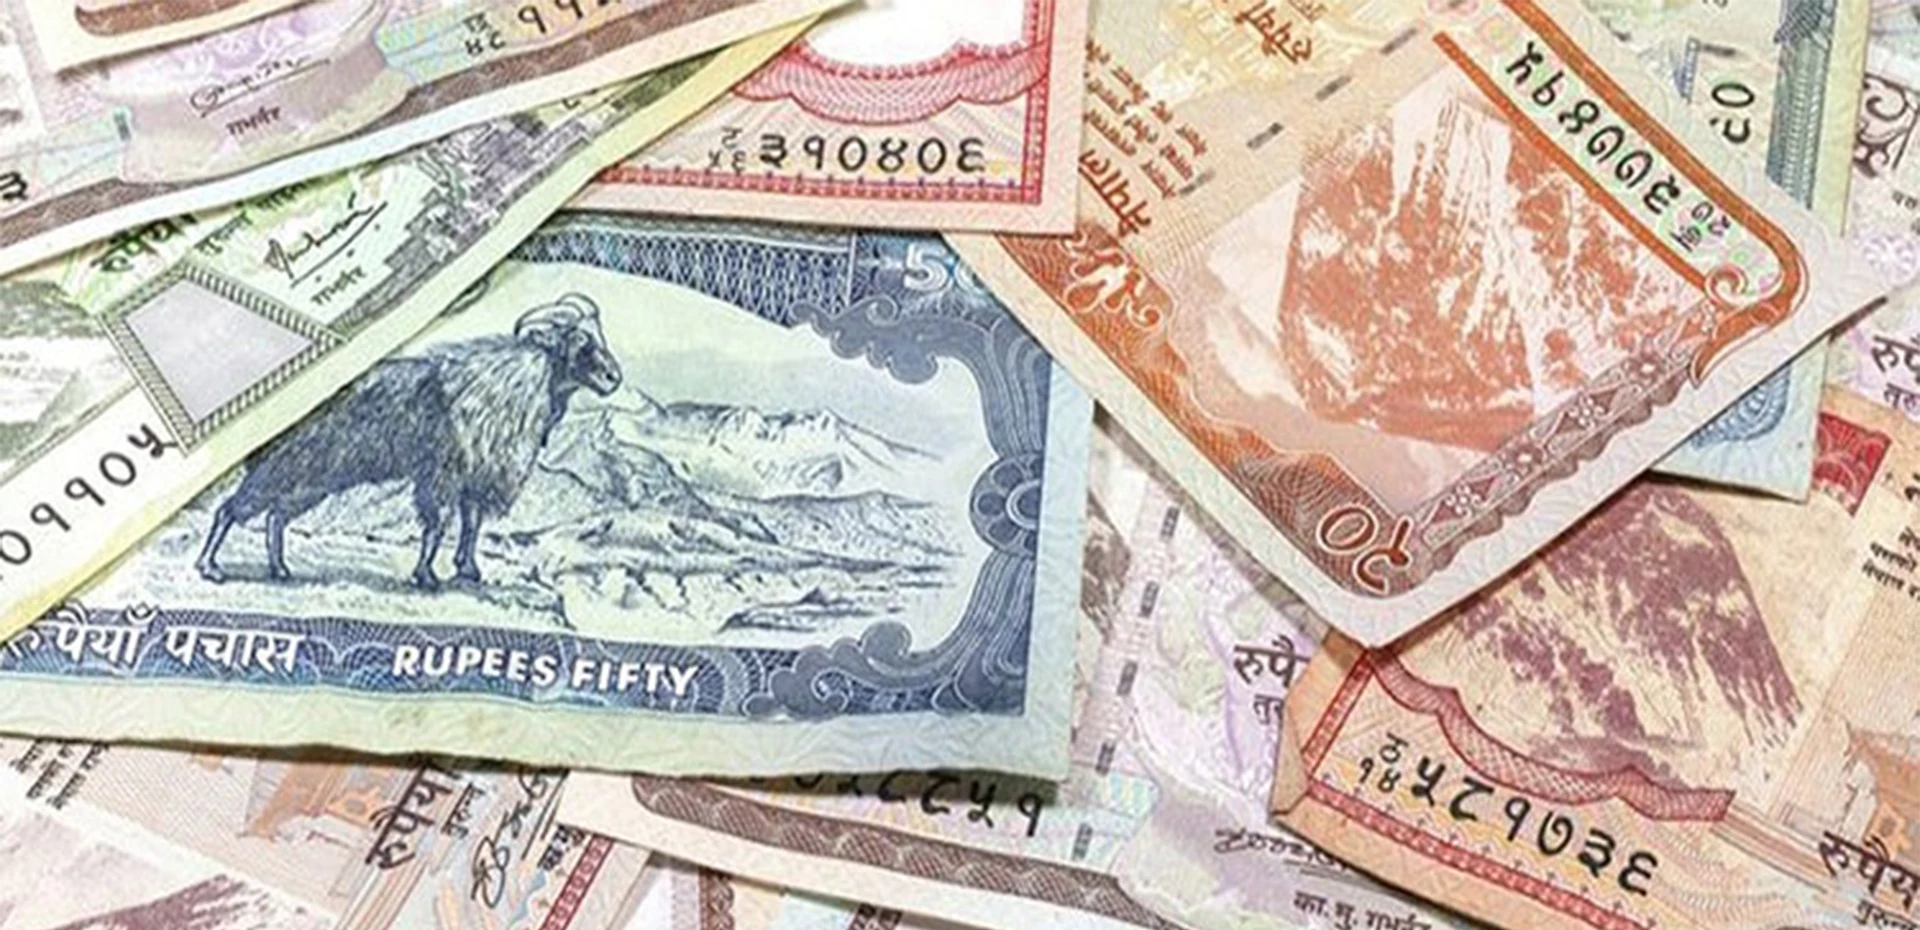 Background Image of Currency & Payments in Nepal